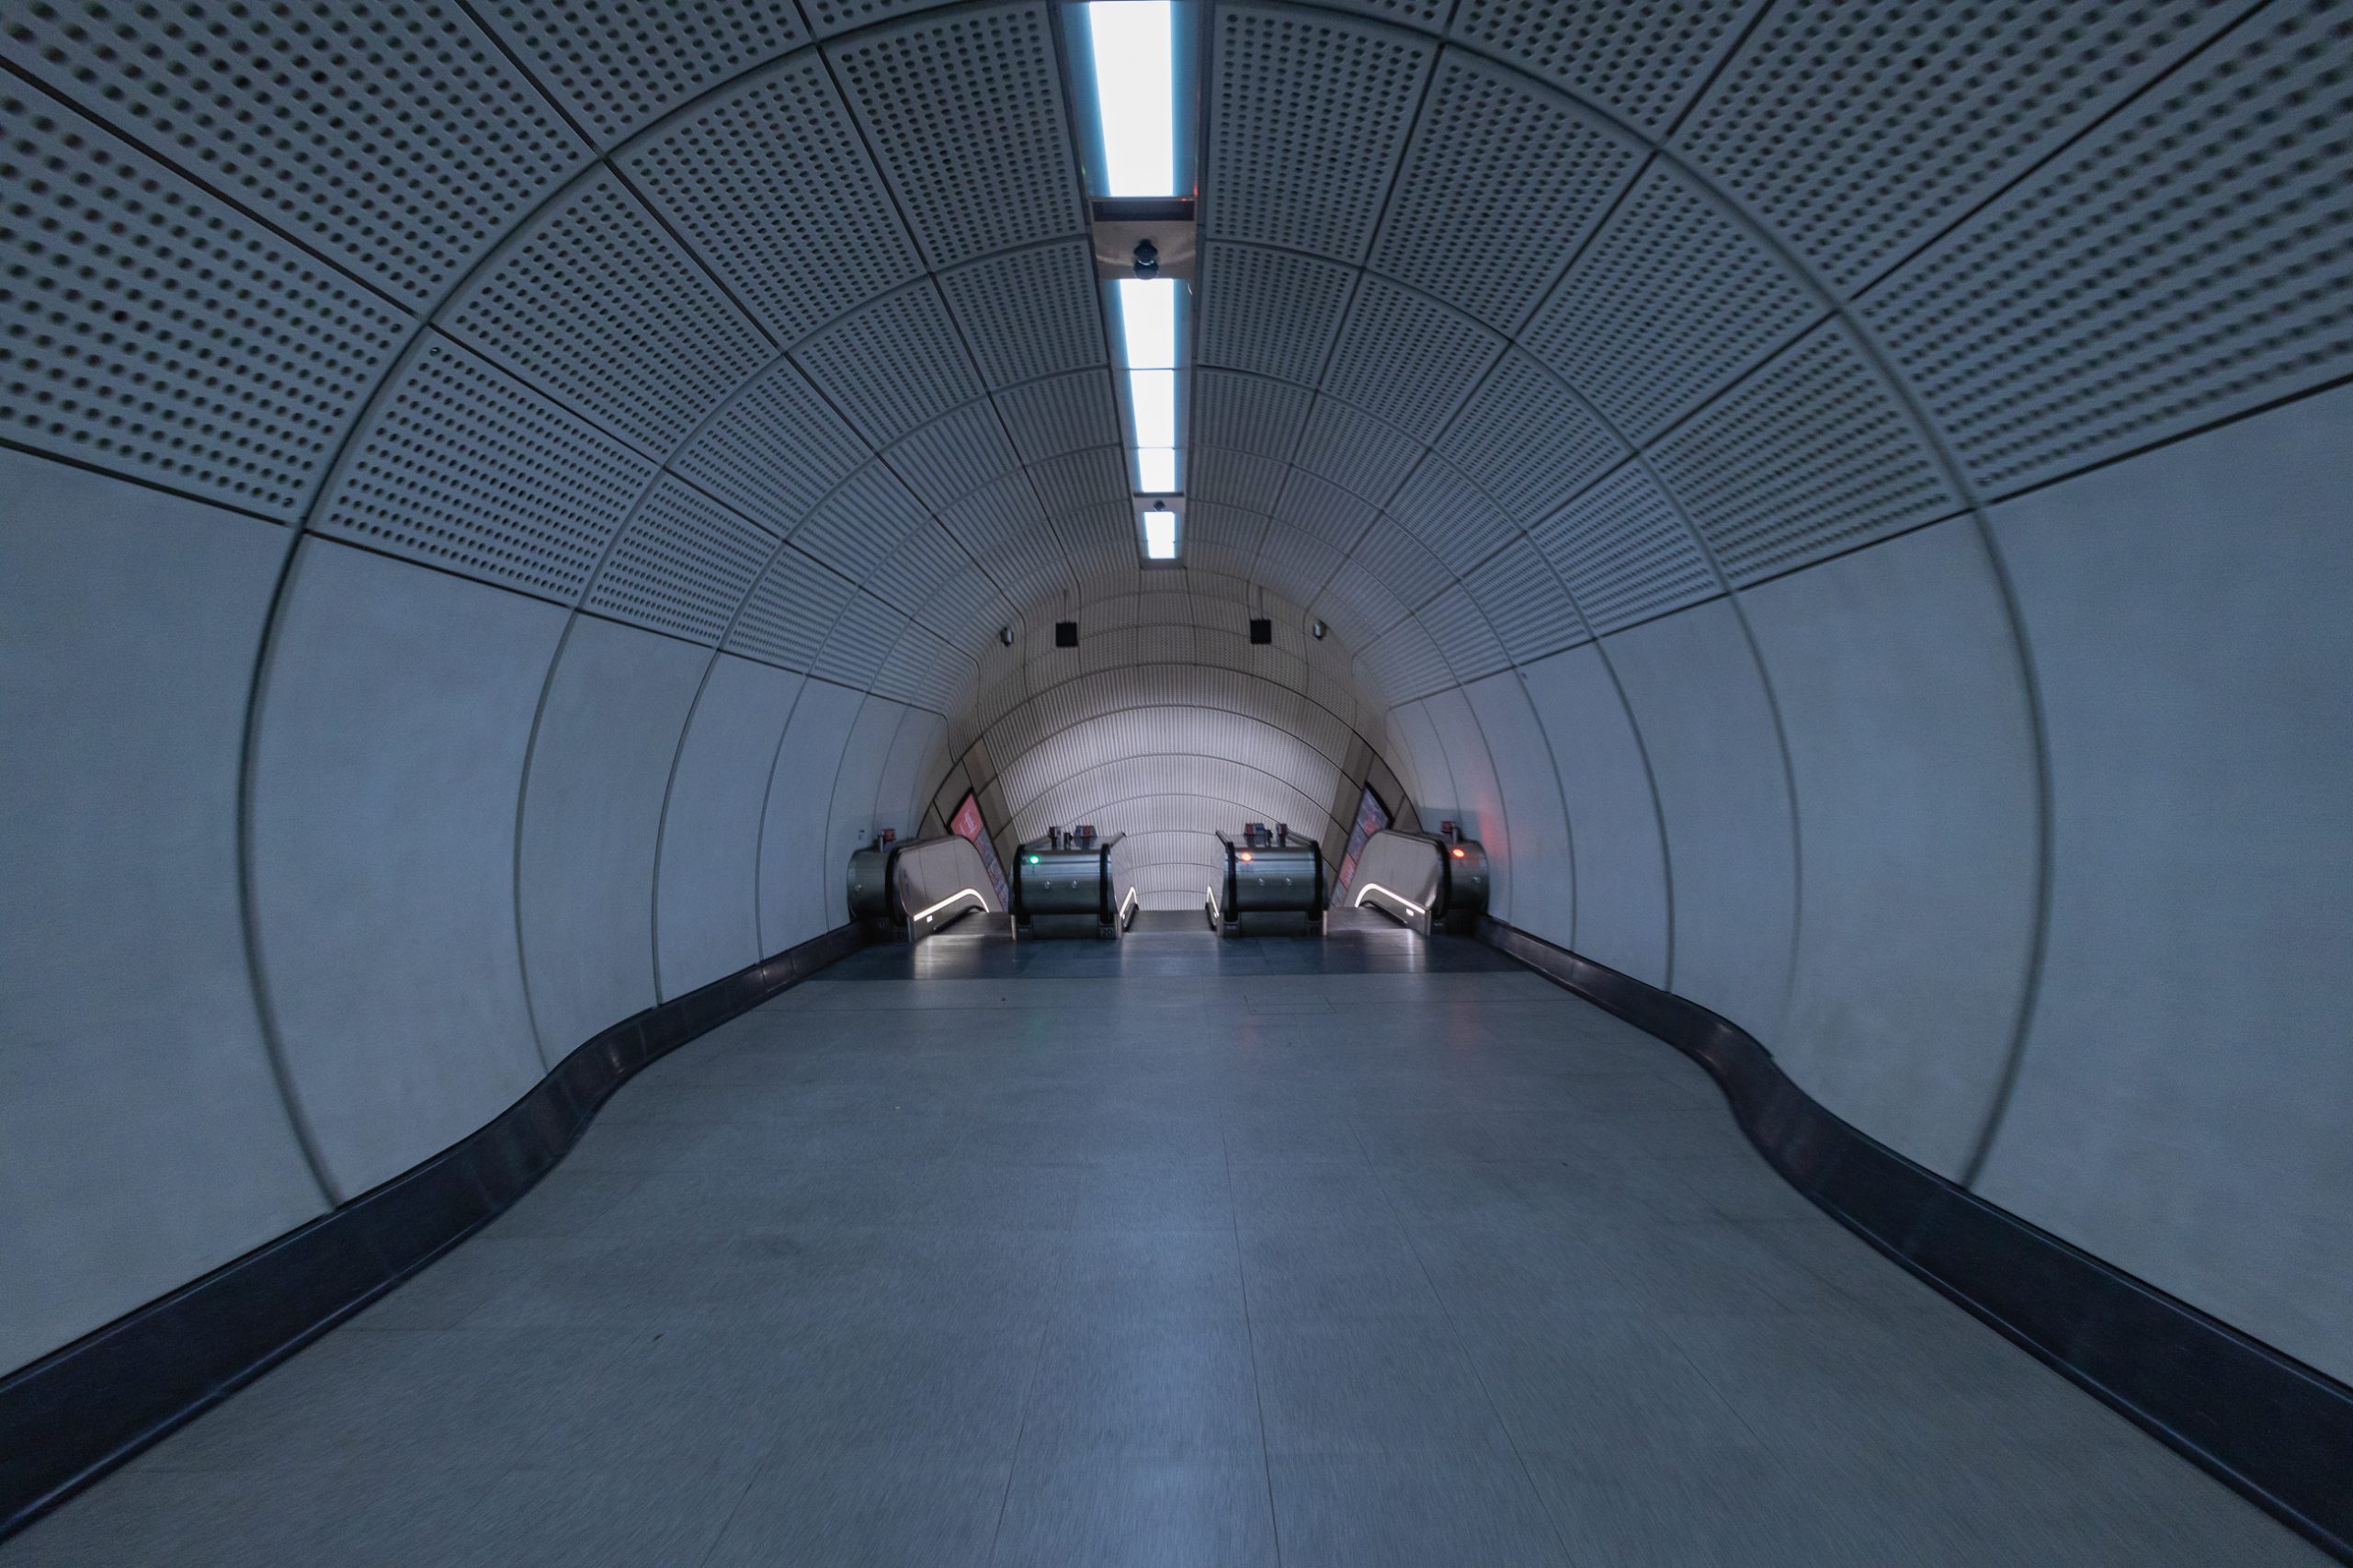 A standing height picture of the end of a tunnel leading to three escalators. The tunnel widens, producing an optical illusion of the floor rising in a slightly disturbing way